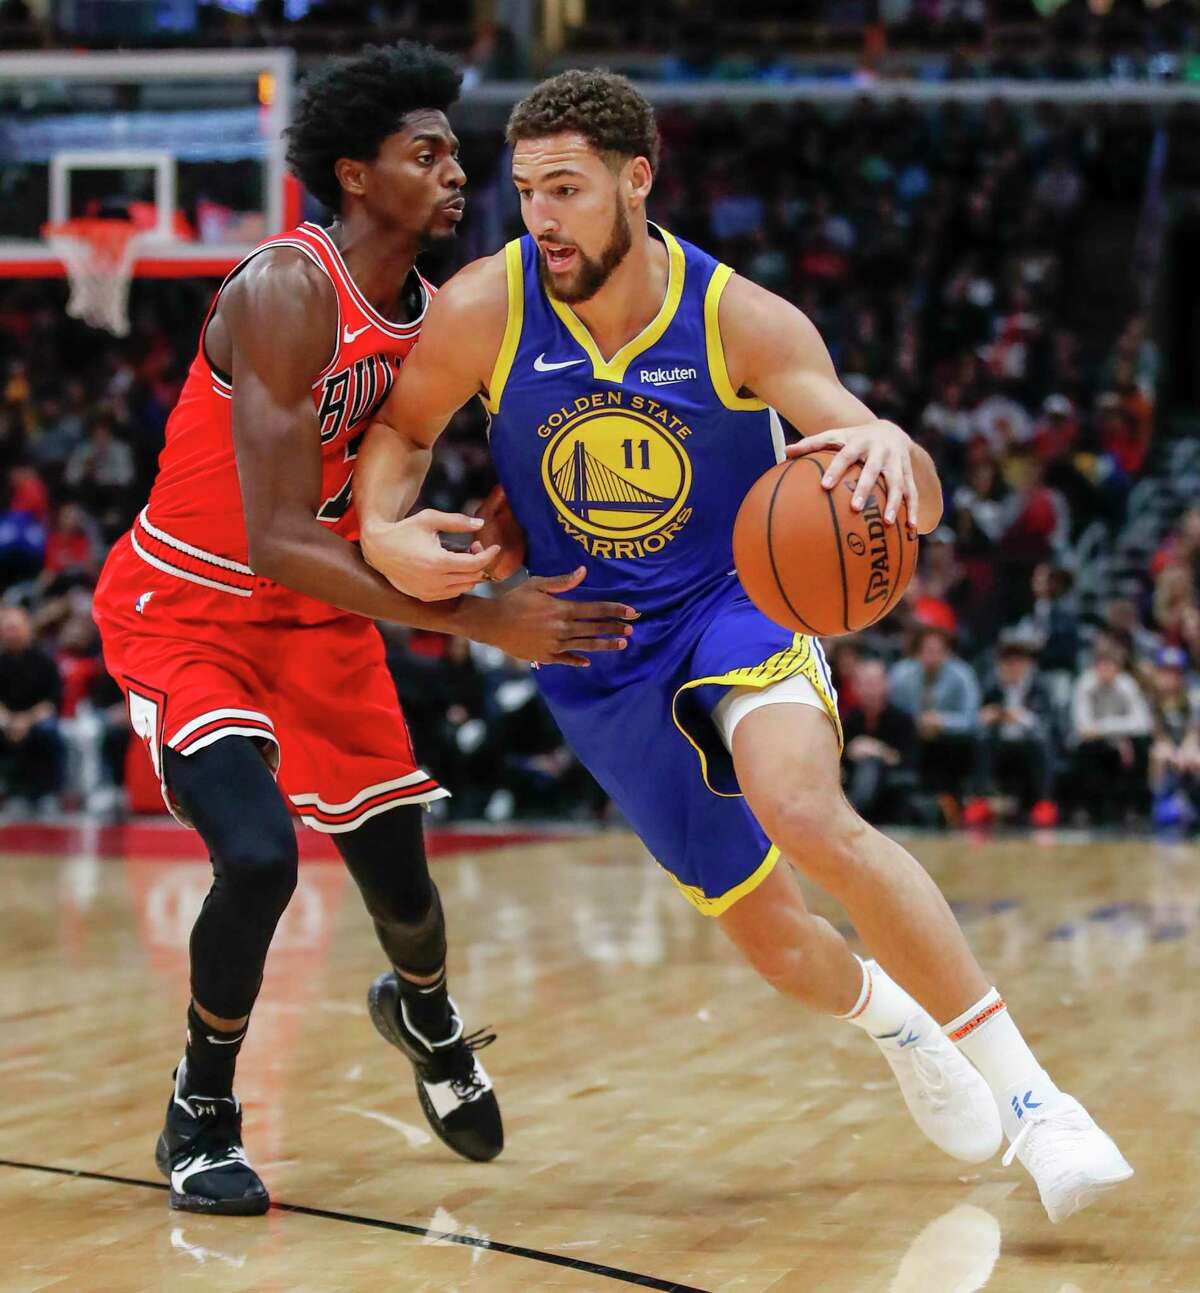 Golden State Warriors guard Klay Thompson, right, drives to the basket against Chicago Bulls forward Justin Holiday, left, during the first half of an NBA basketball game, Monday, Oct. 29, 2018, in Chicago. (AP Photo/Kamil Krzaczynski)